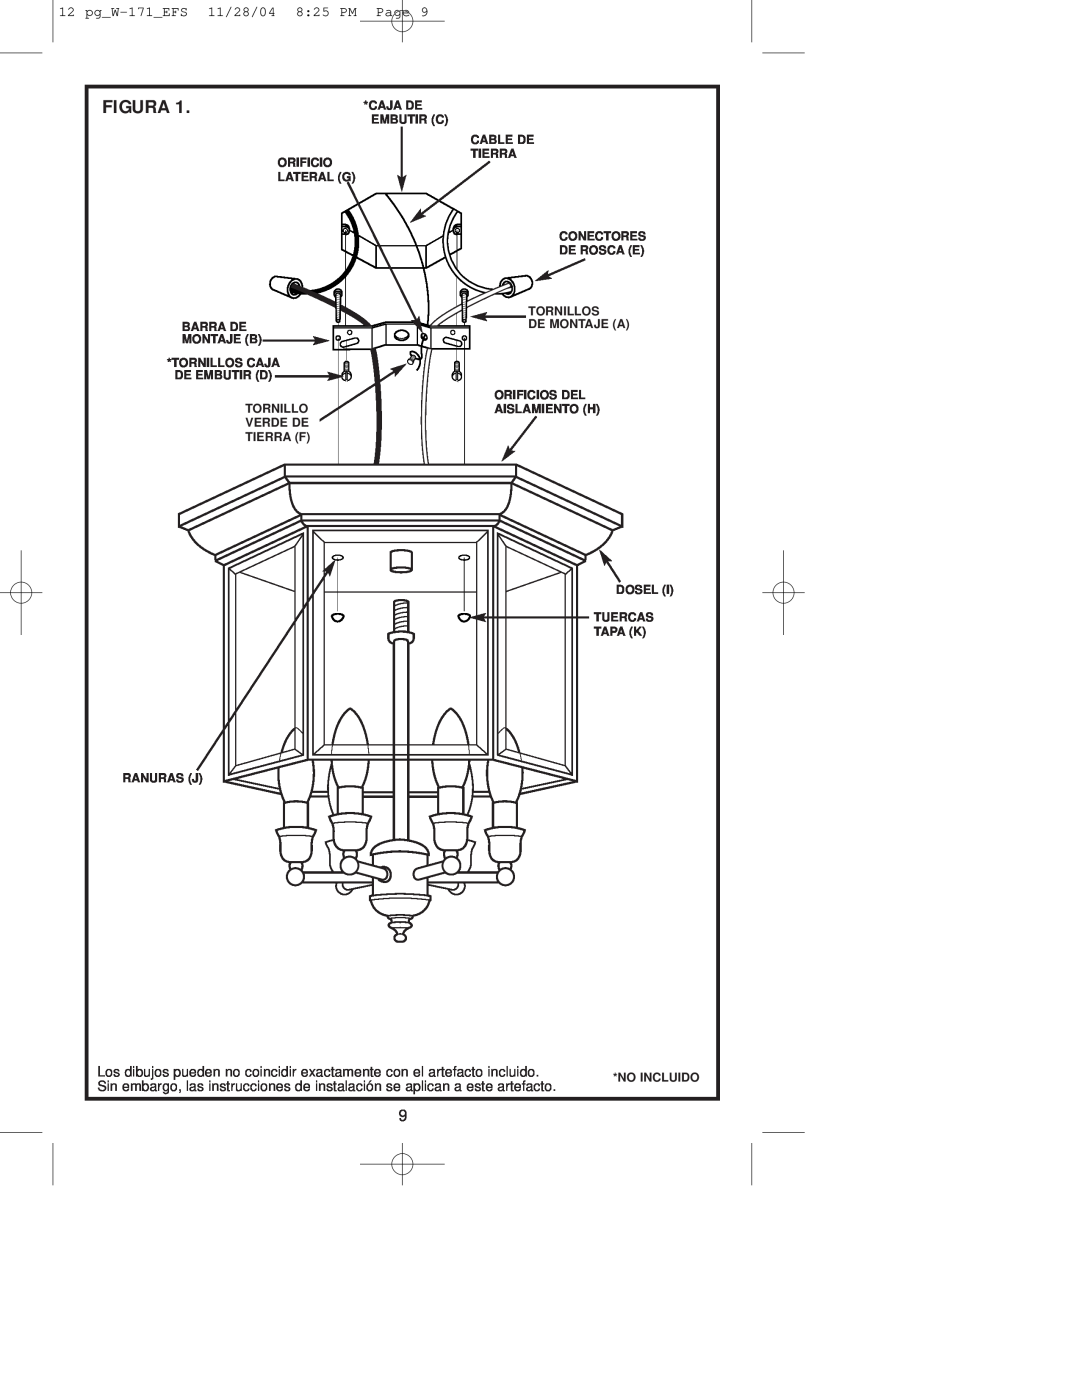 Westinghouse Outdoor Lighting Fixture owner manual Figura, pgW-171EFS 11/28/04 825 PM Page 